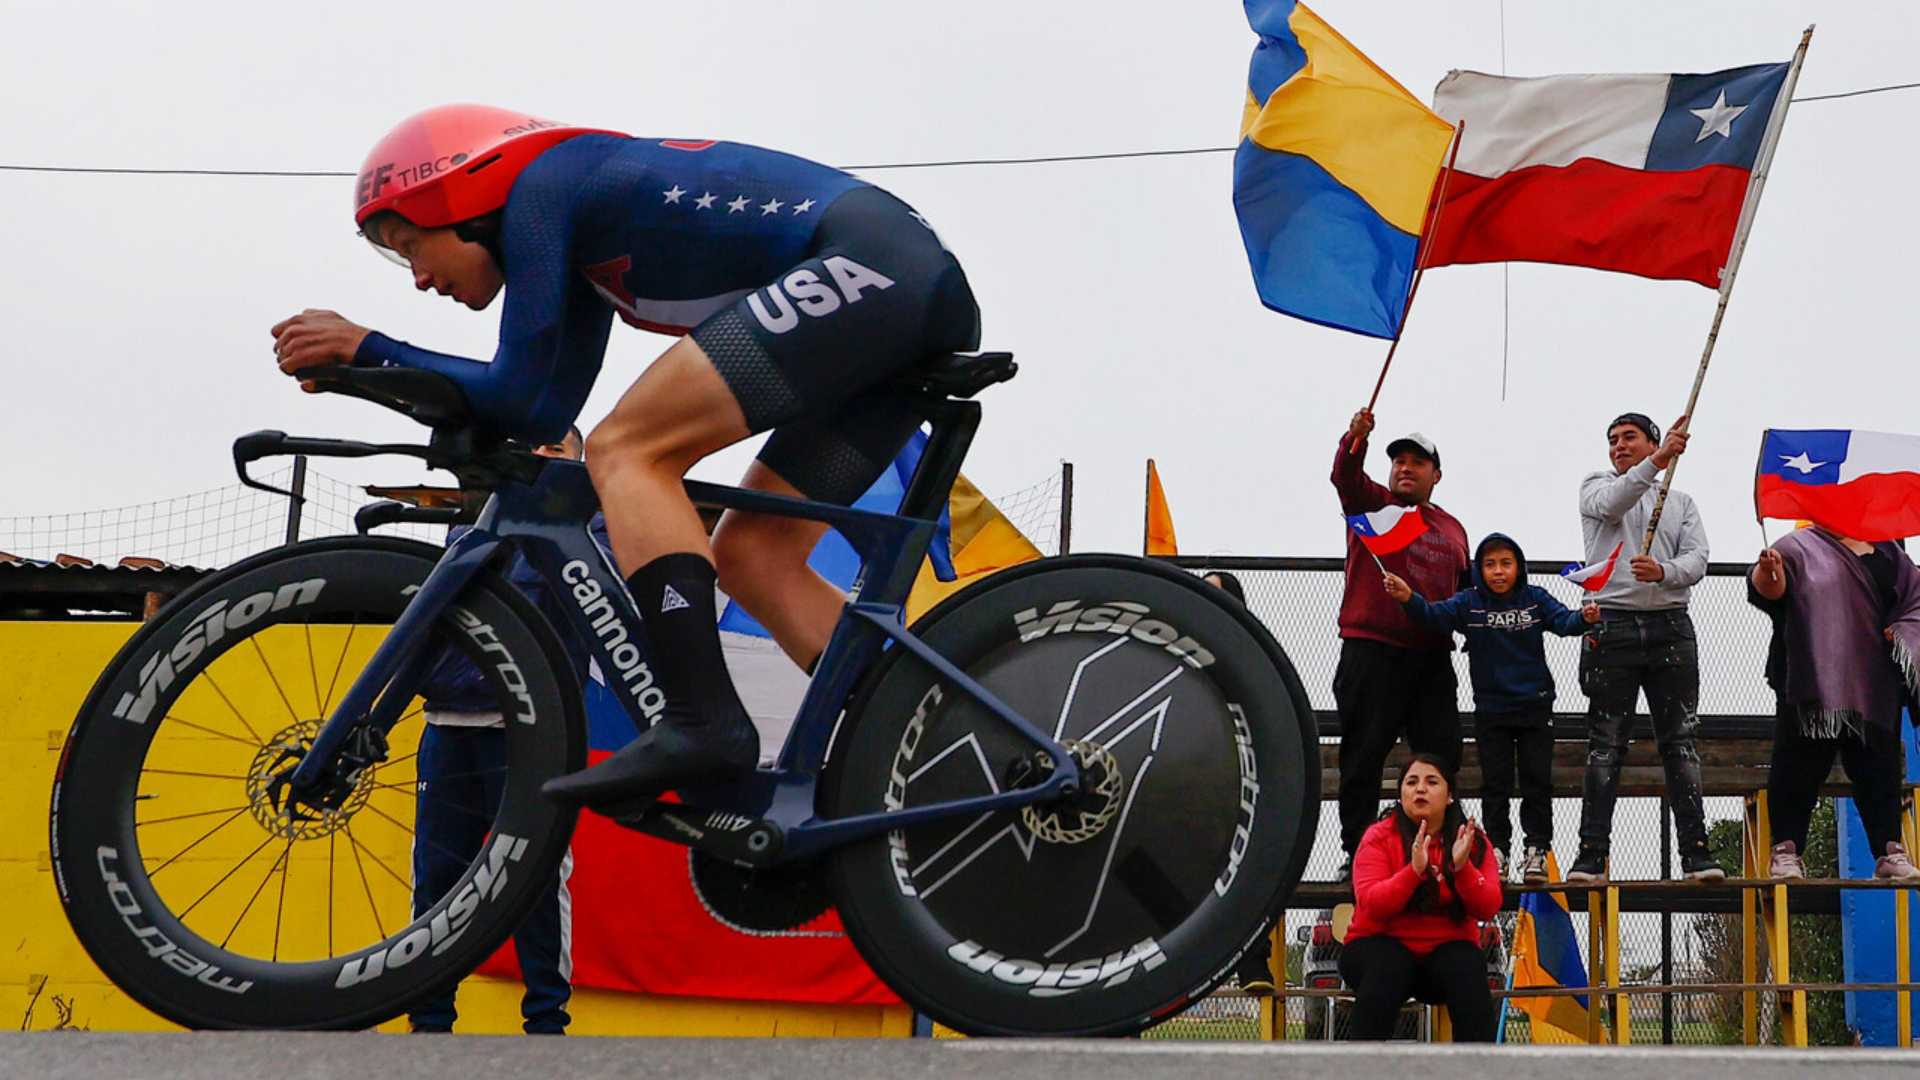 United States won the female's individual time trial, and Chile took the bronze